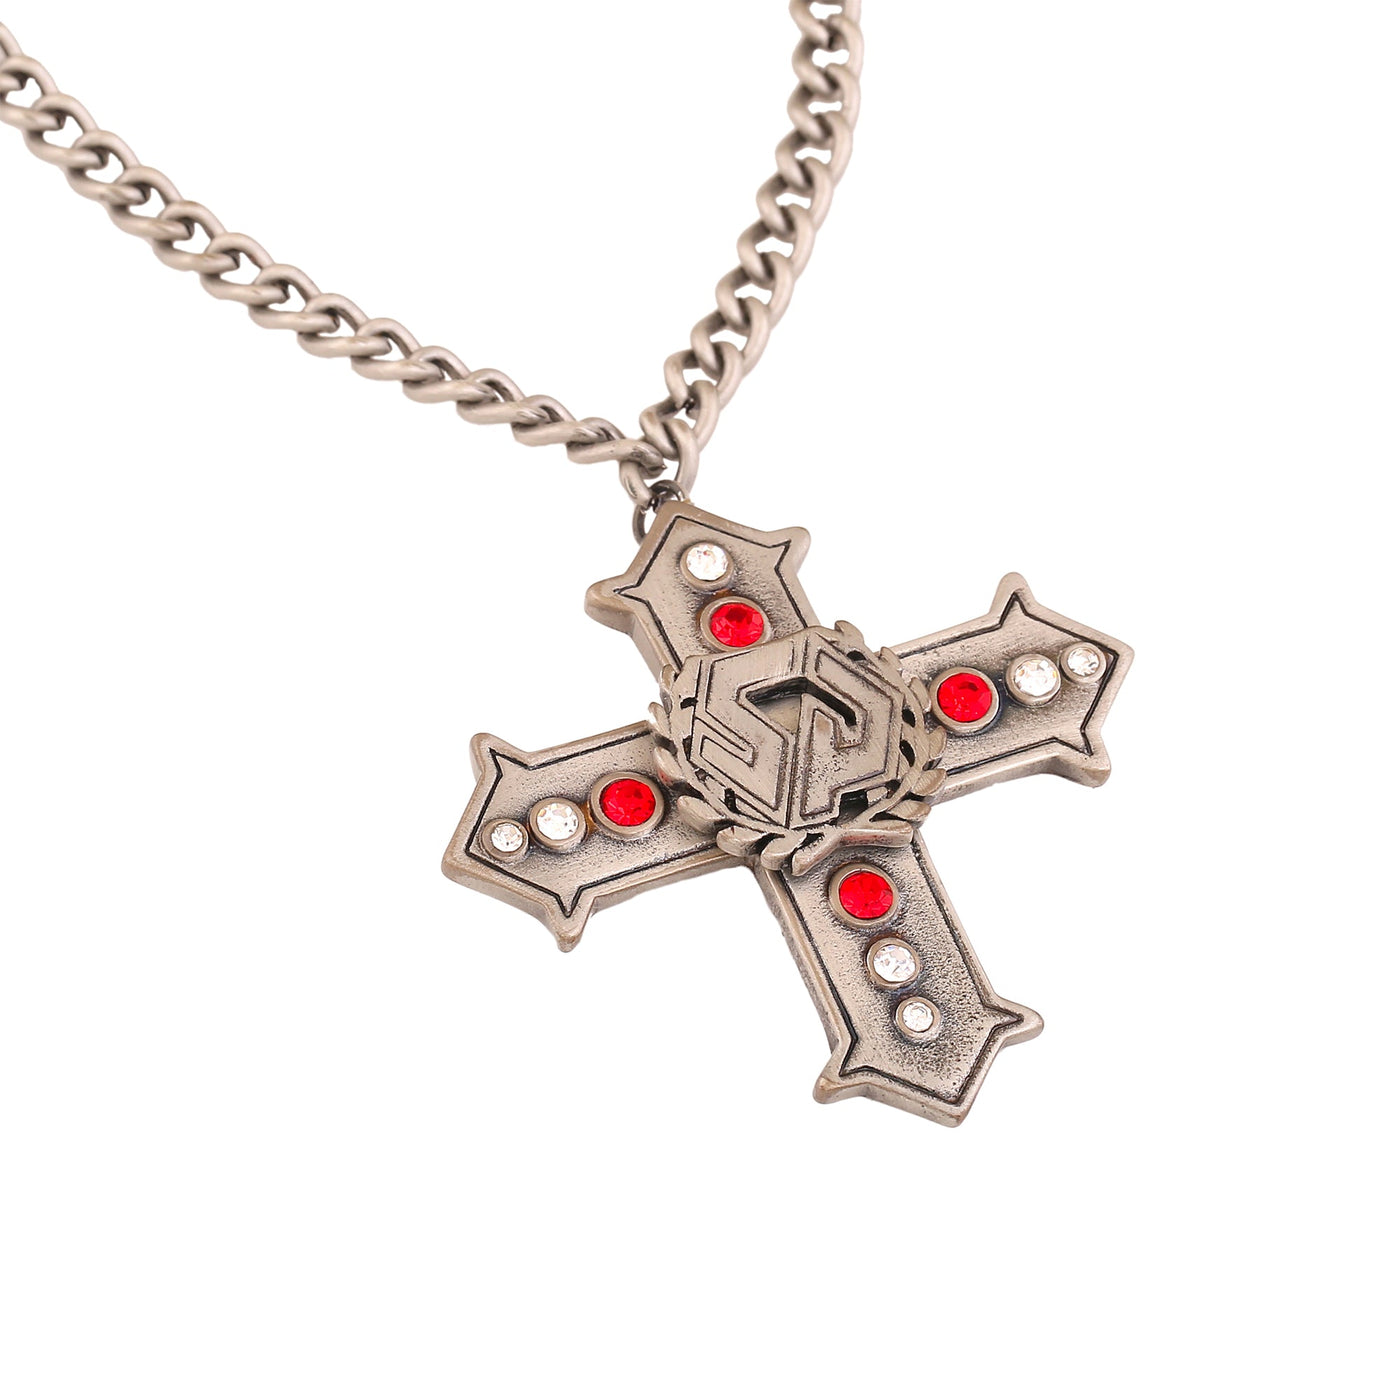 Estele Tin Oxidised Plated Cross Designer Pendant Necklace with Red & White Stone for Women